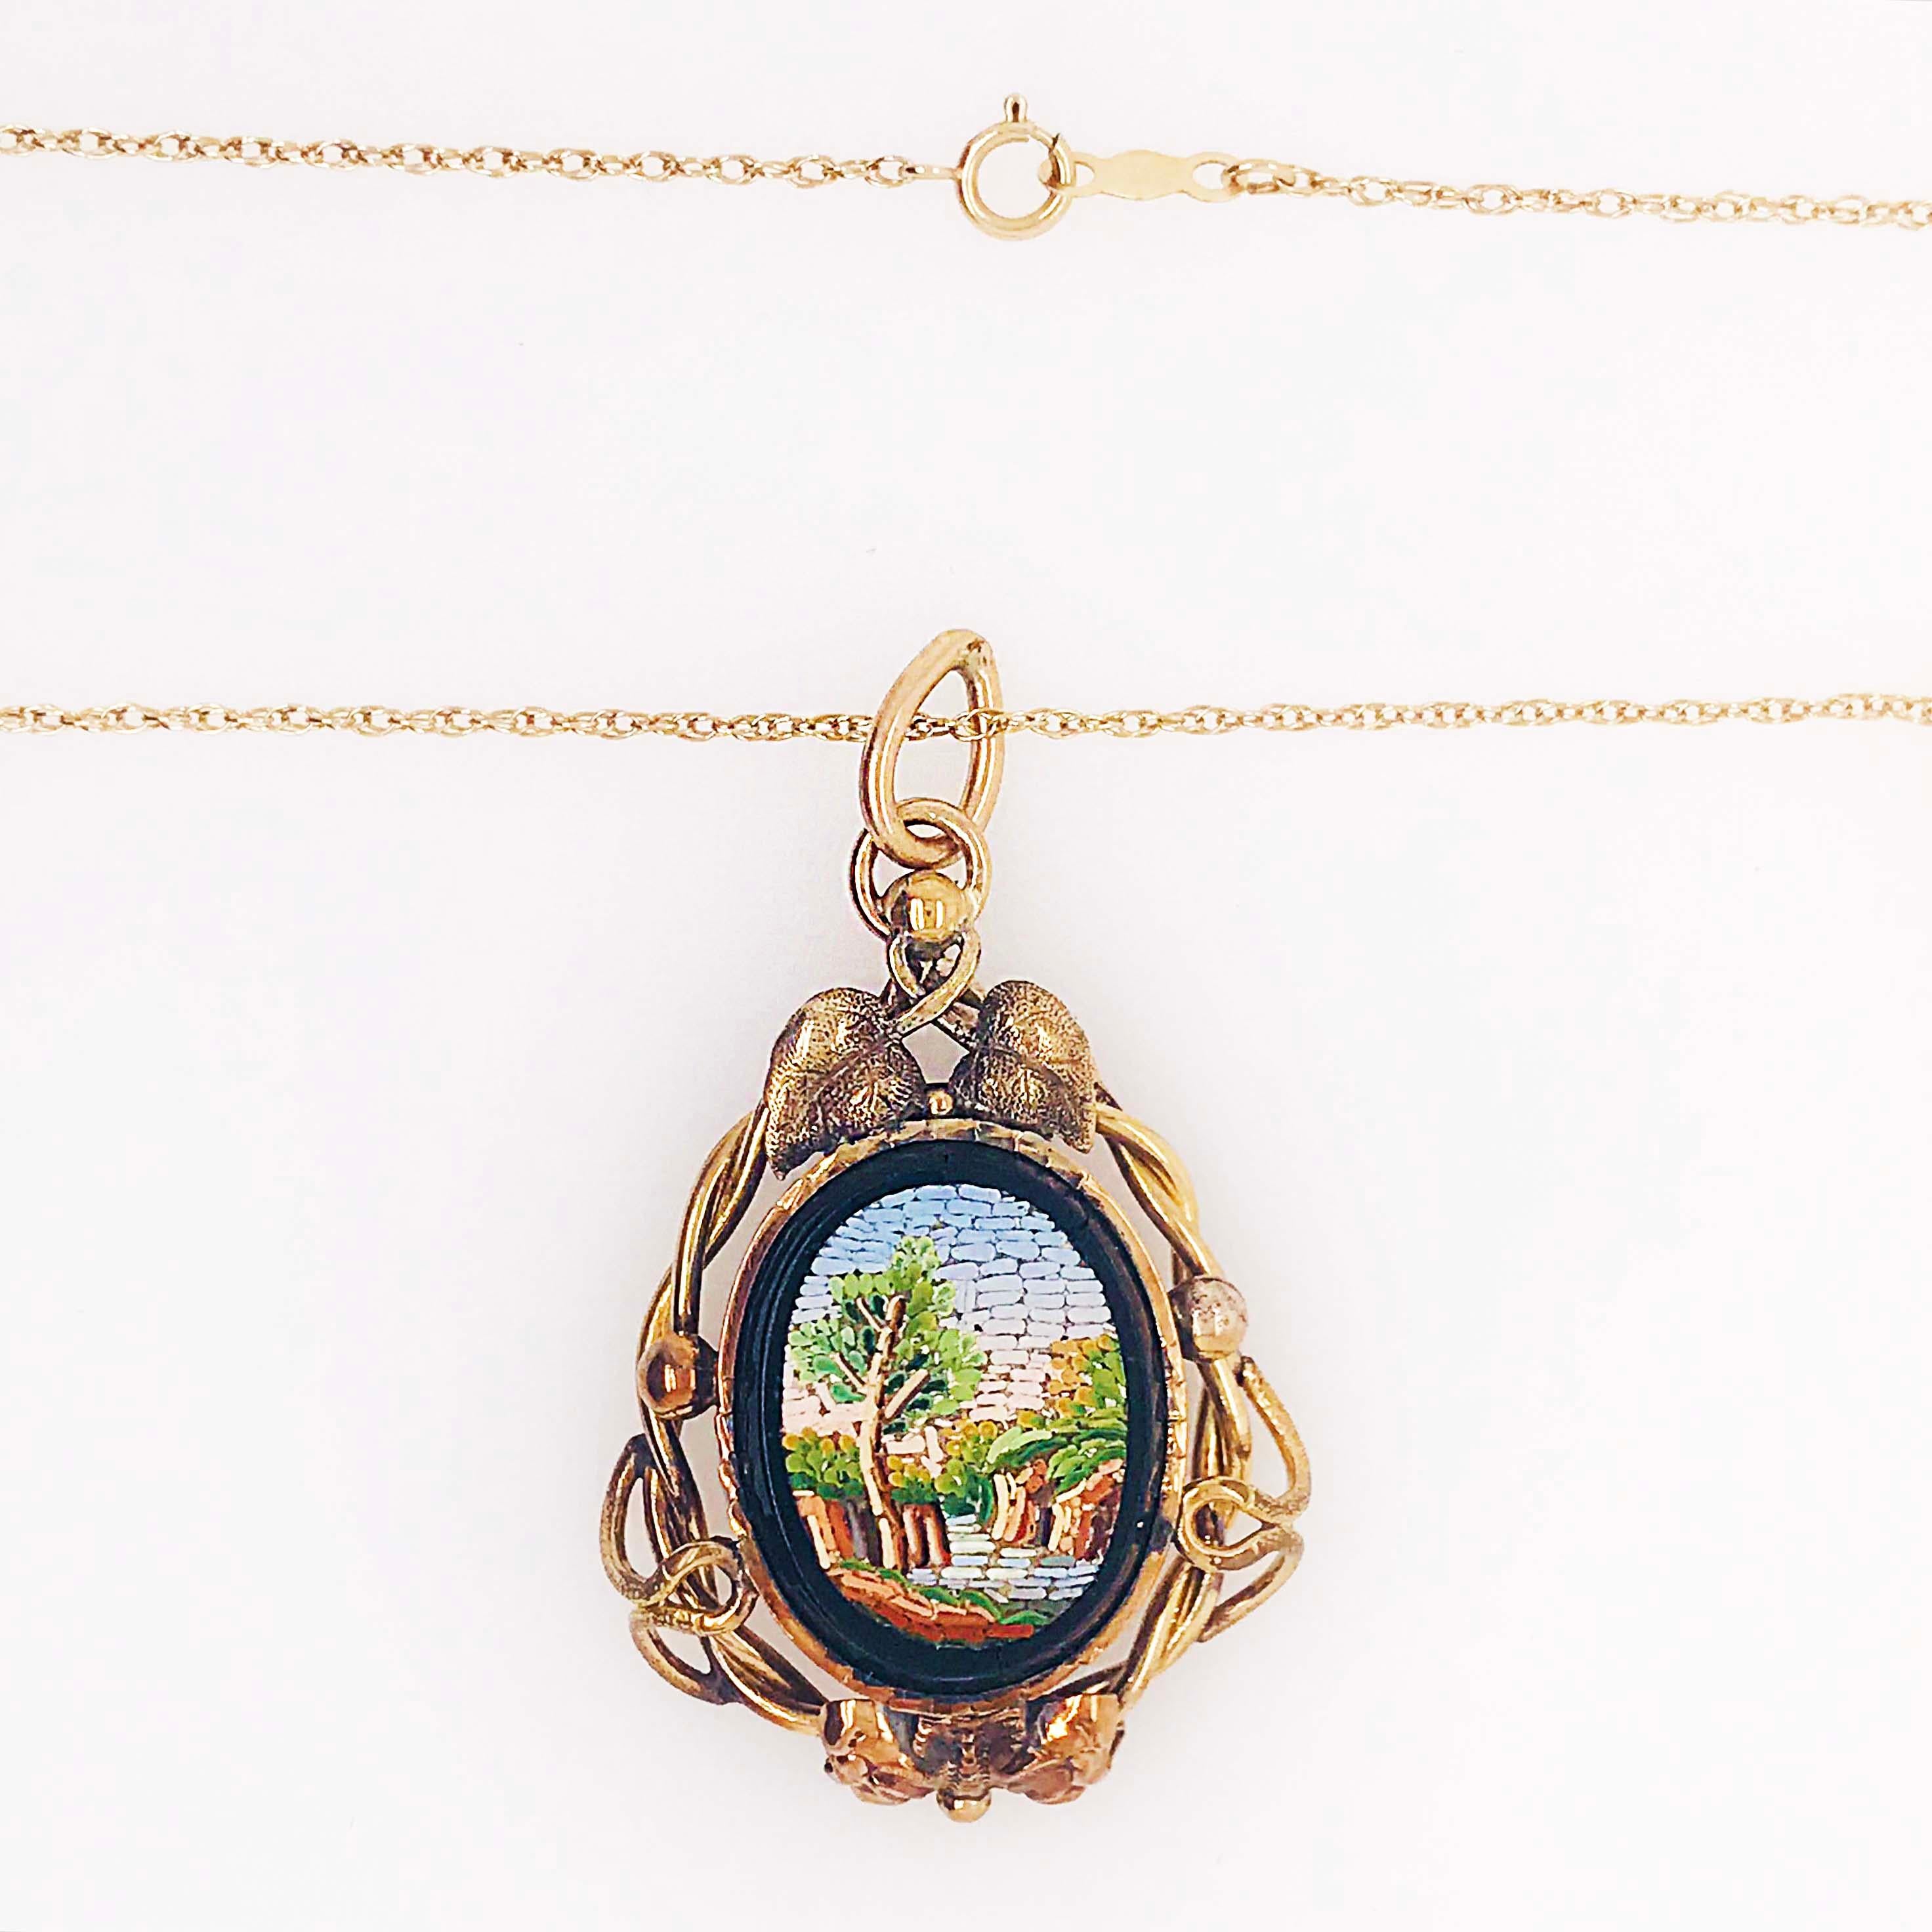 The antique micromosaic Italian pendant (or micro mosaic necklace) is a genuine CIRCA 1869 - Victorian era- antique fine jewelry piece. This 19th century pendant has an intricate micromosaic on the front. The imagery is fantastic. The work of art